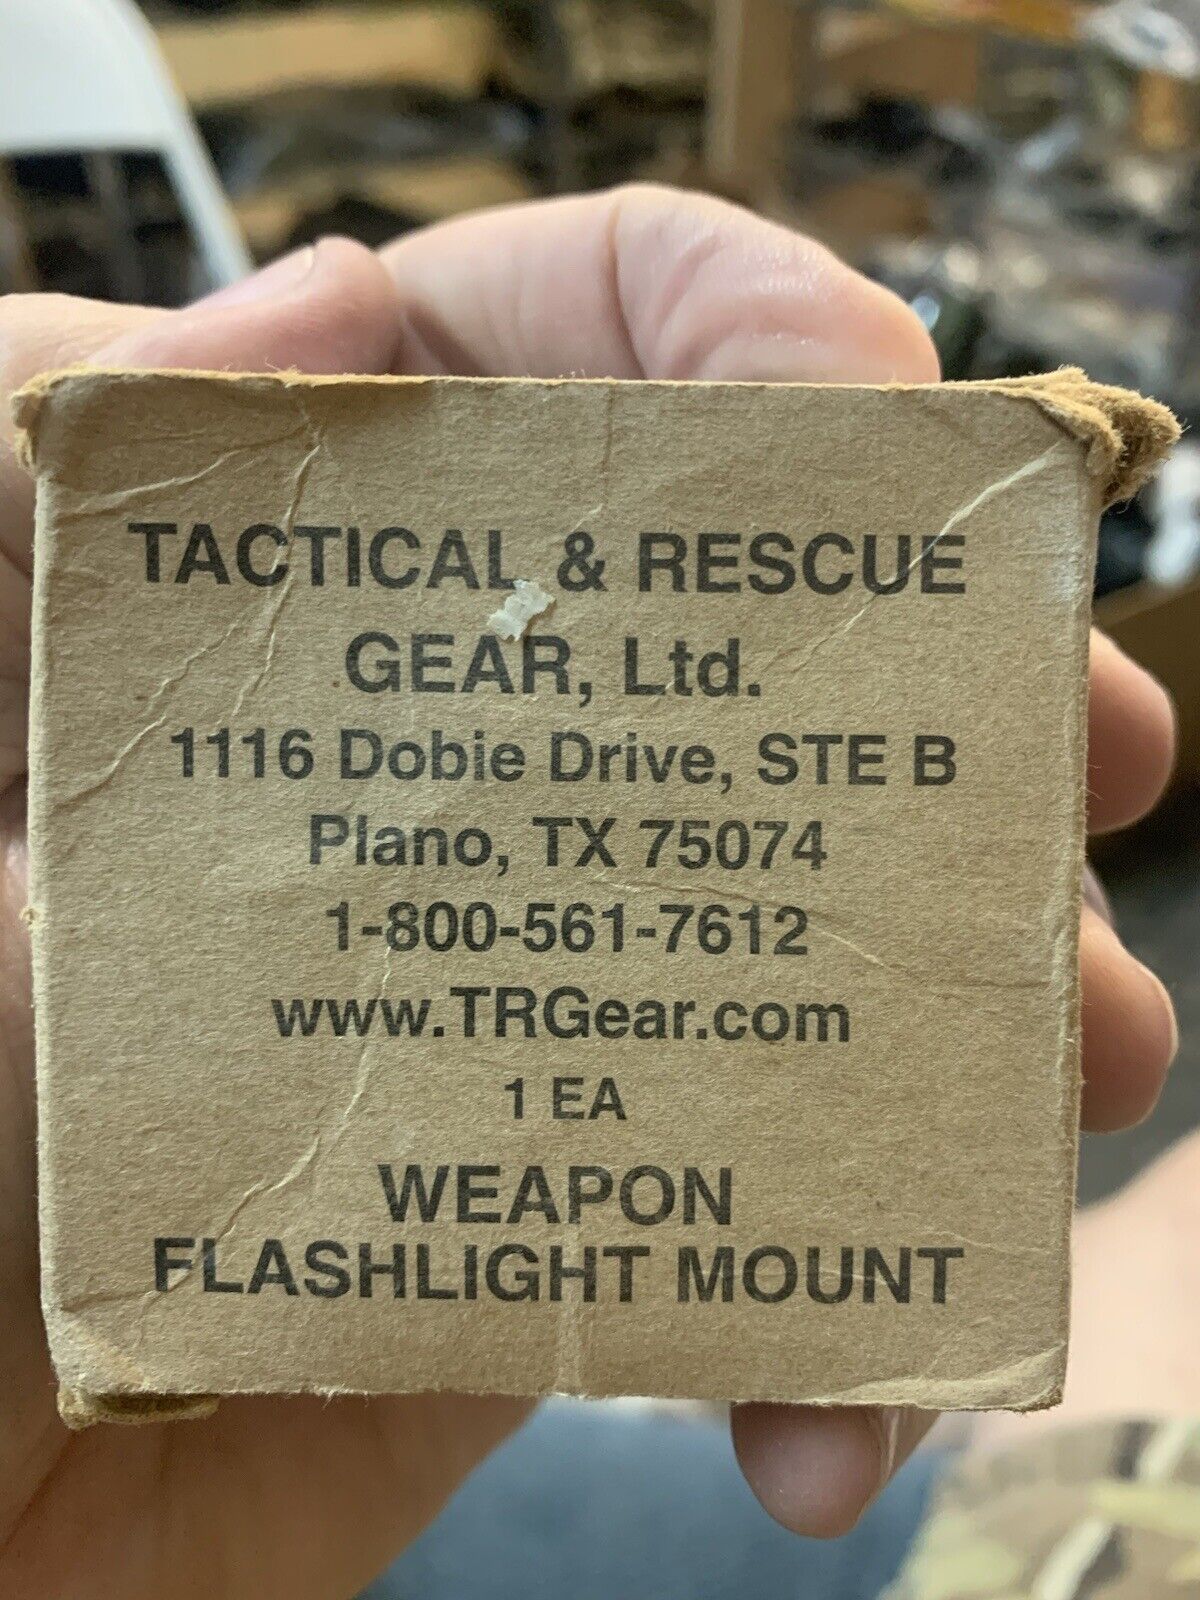 NEW Tactical Flashlight Mount Weapon Mount for Flashlight New in box